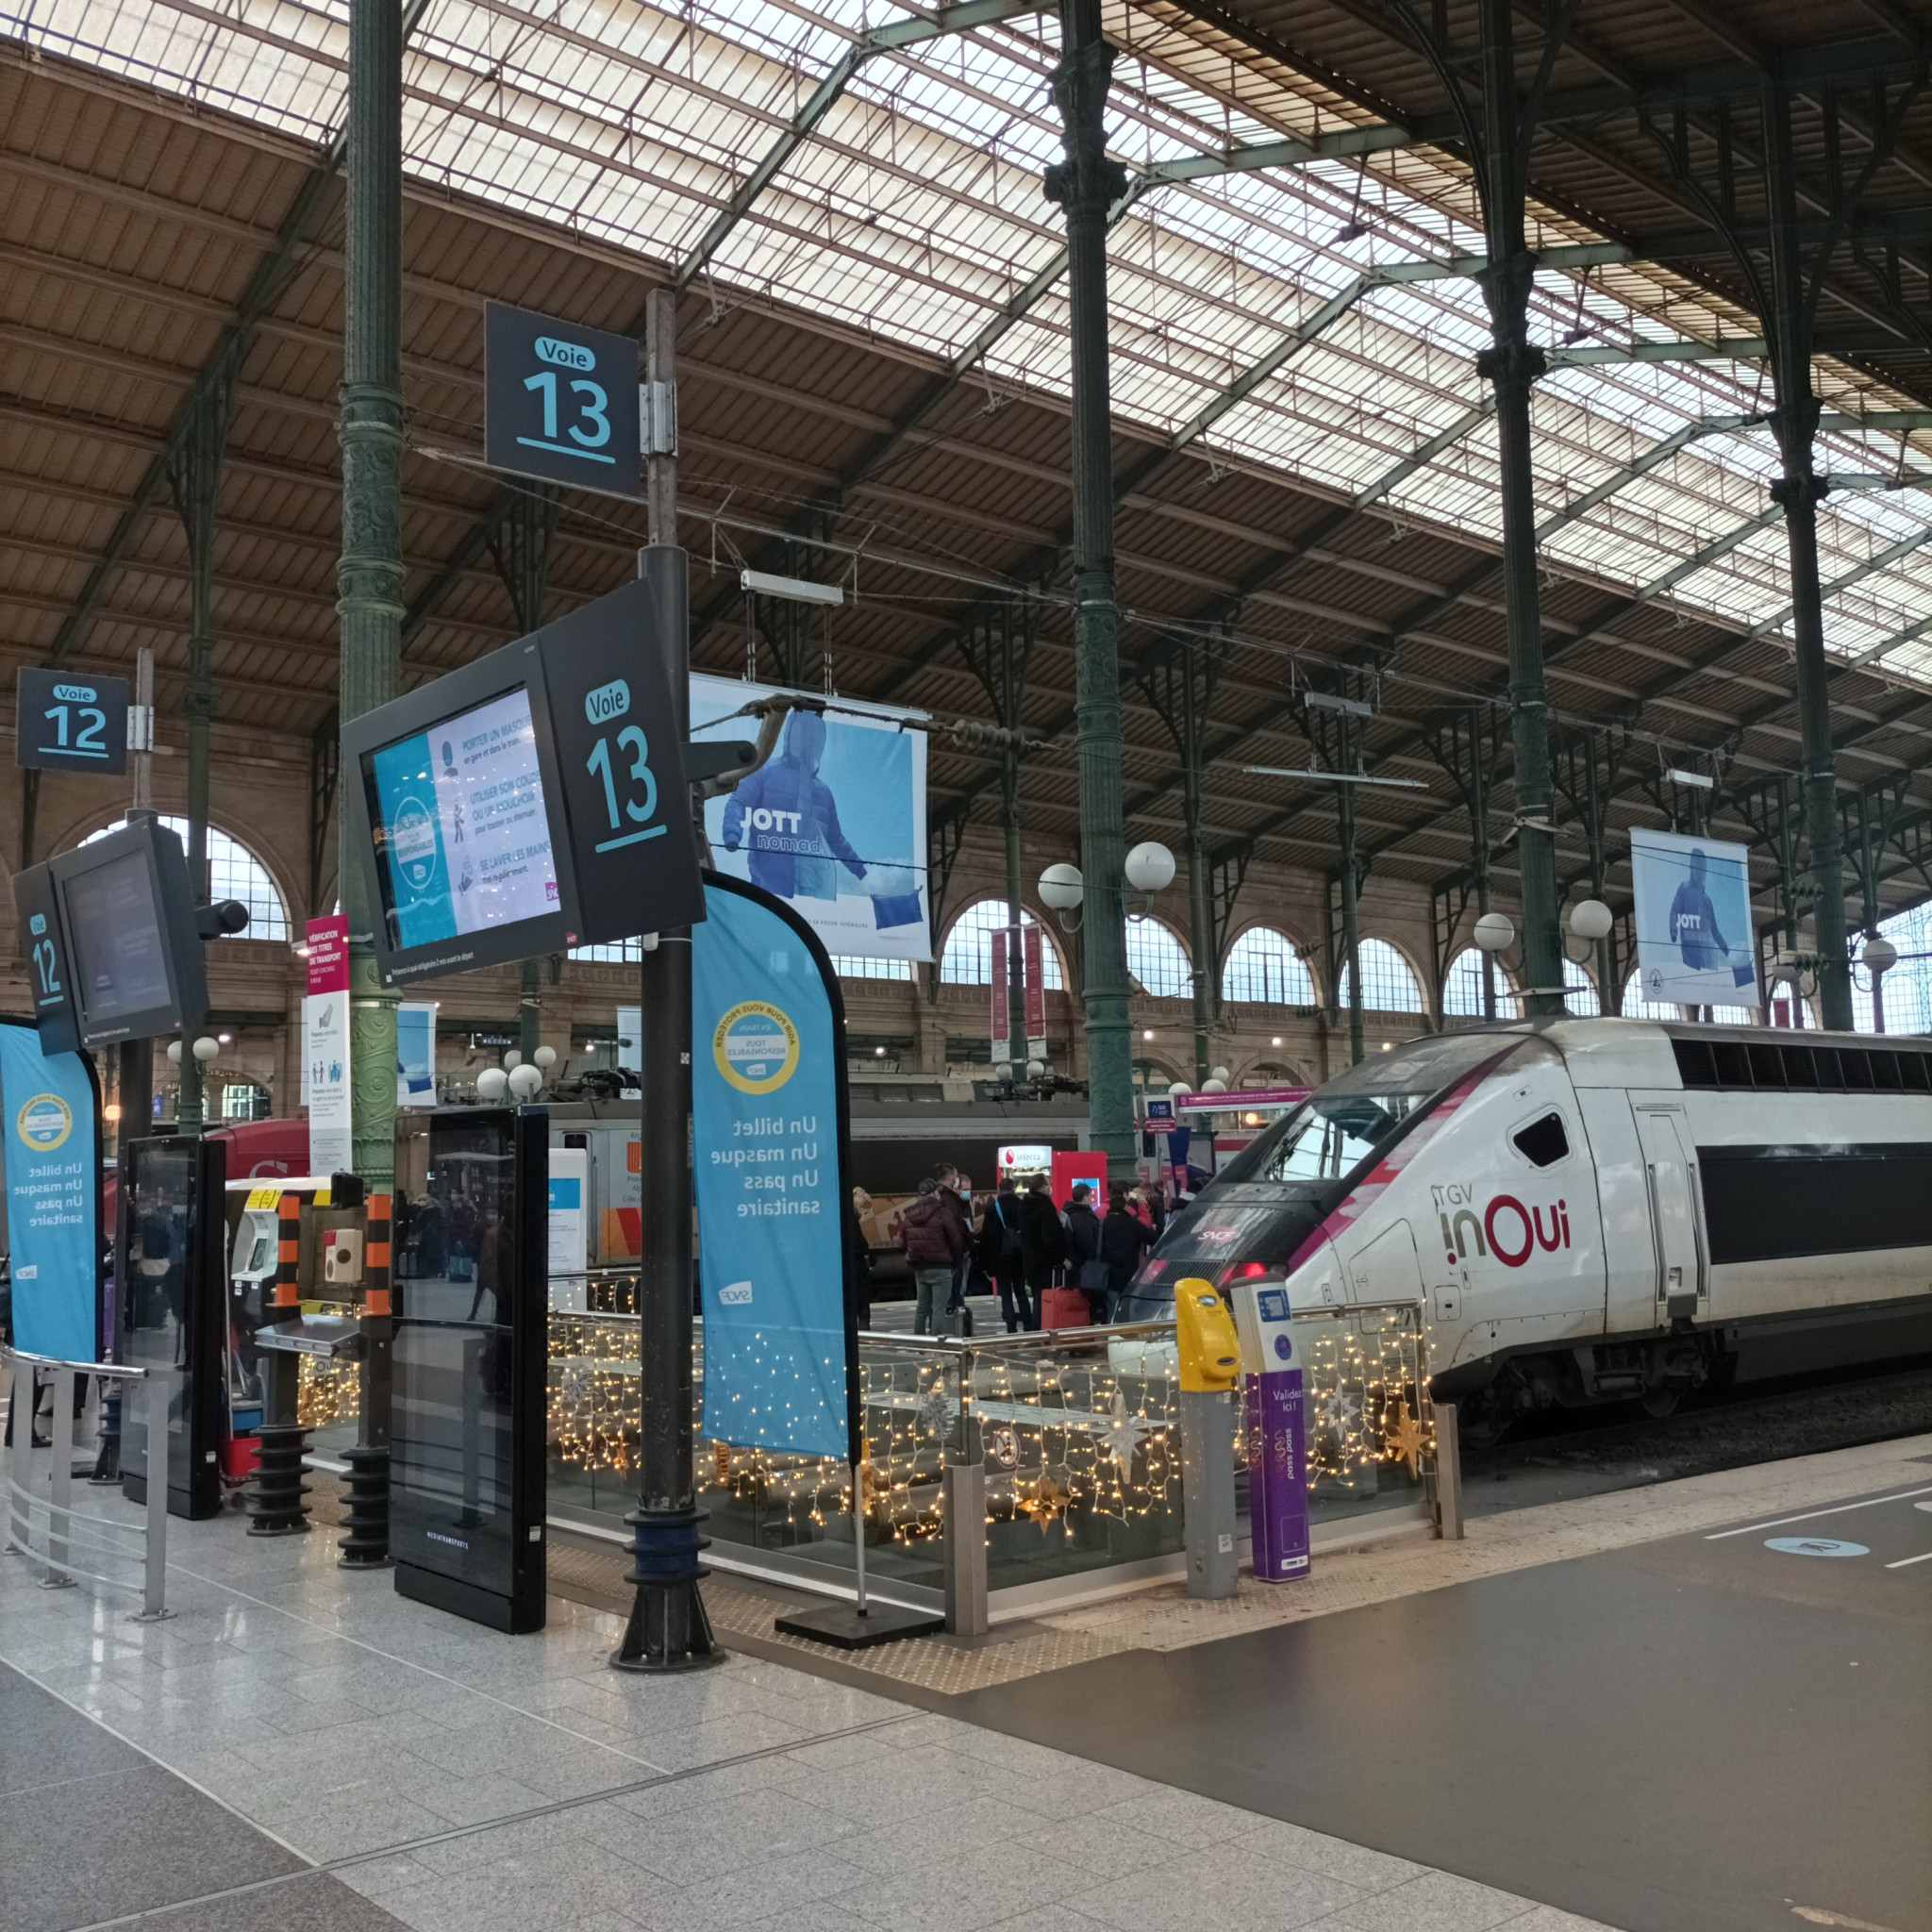 The Gare du Nord is a major terminal for Eurostar and intercity trains ©ITG